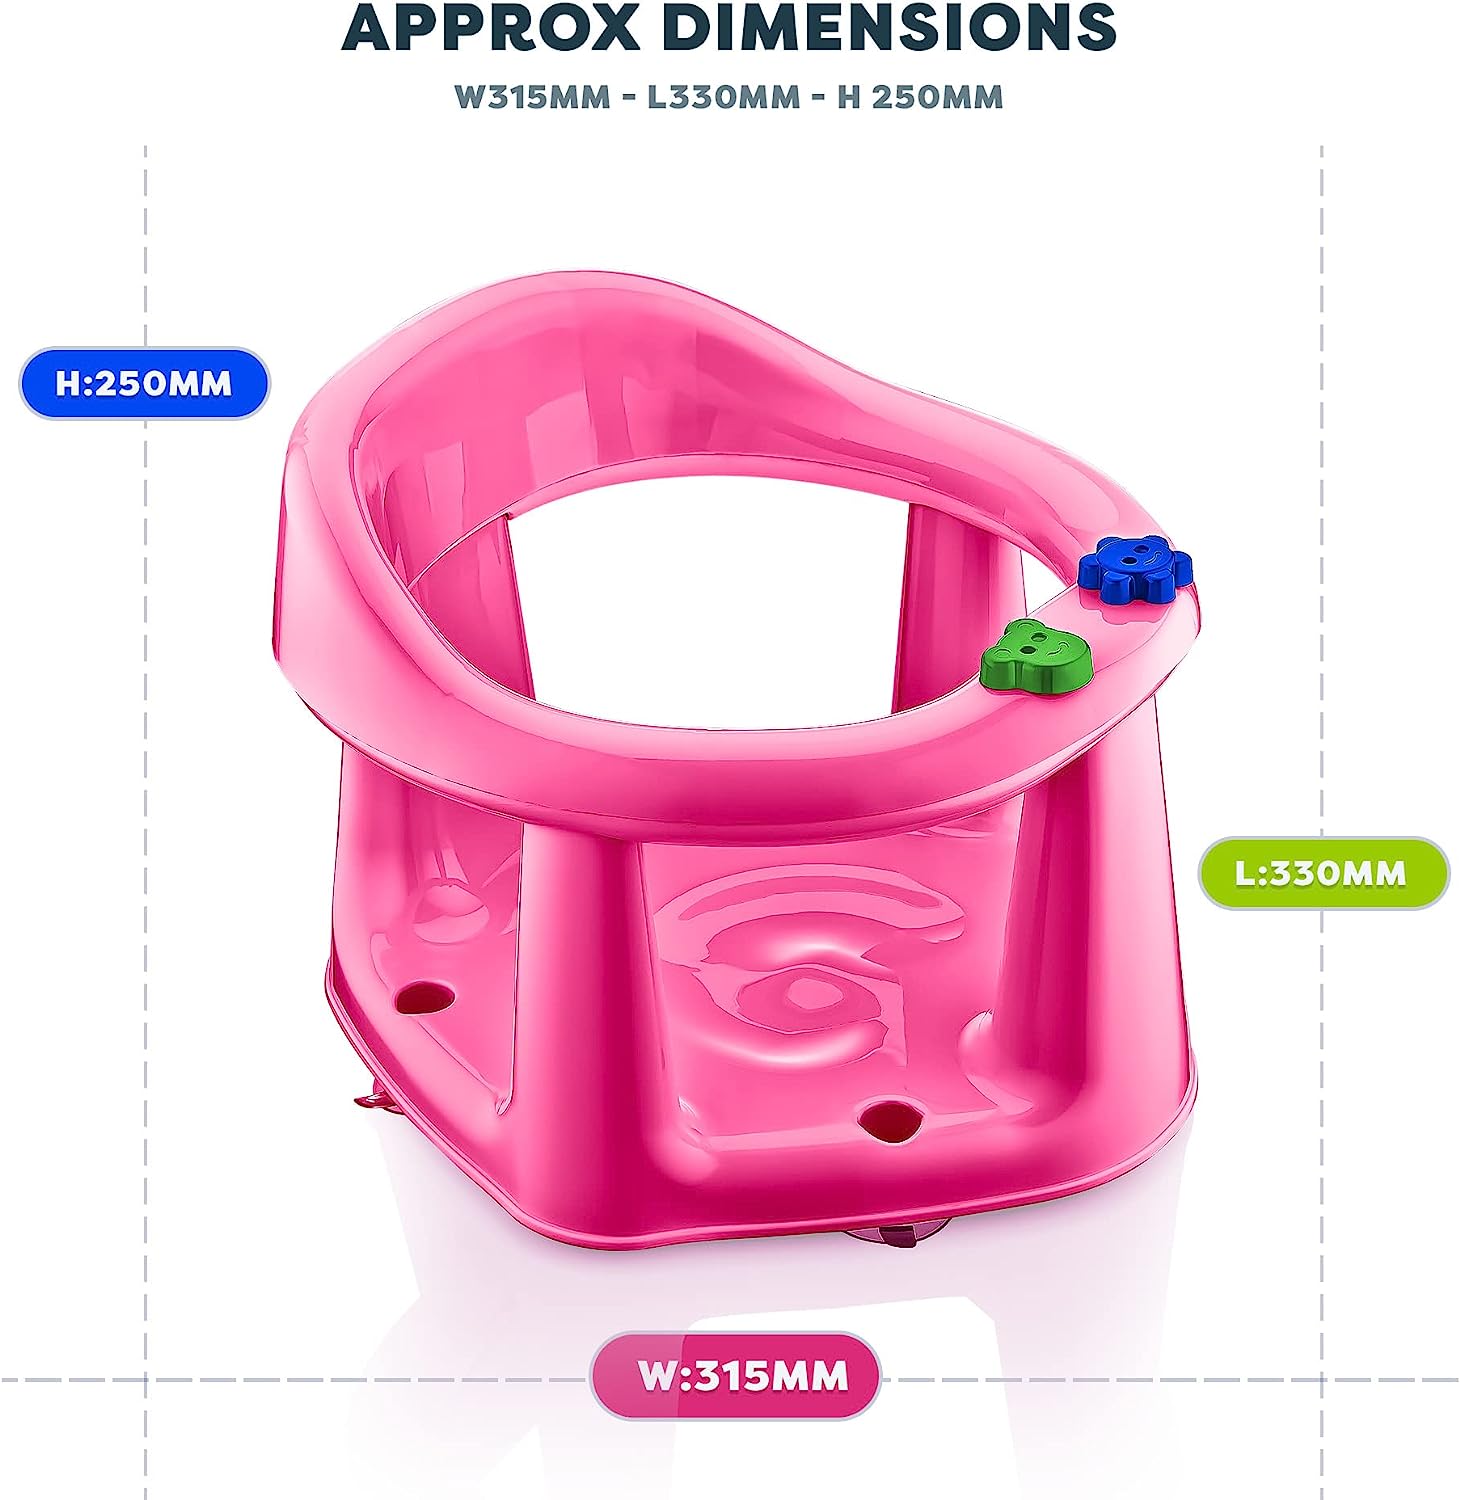 3 in 1 Baby Toddler Child Bath Support Seat Pink